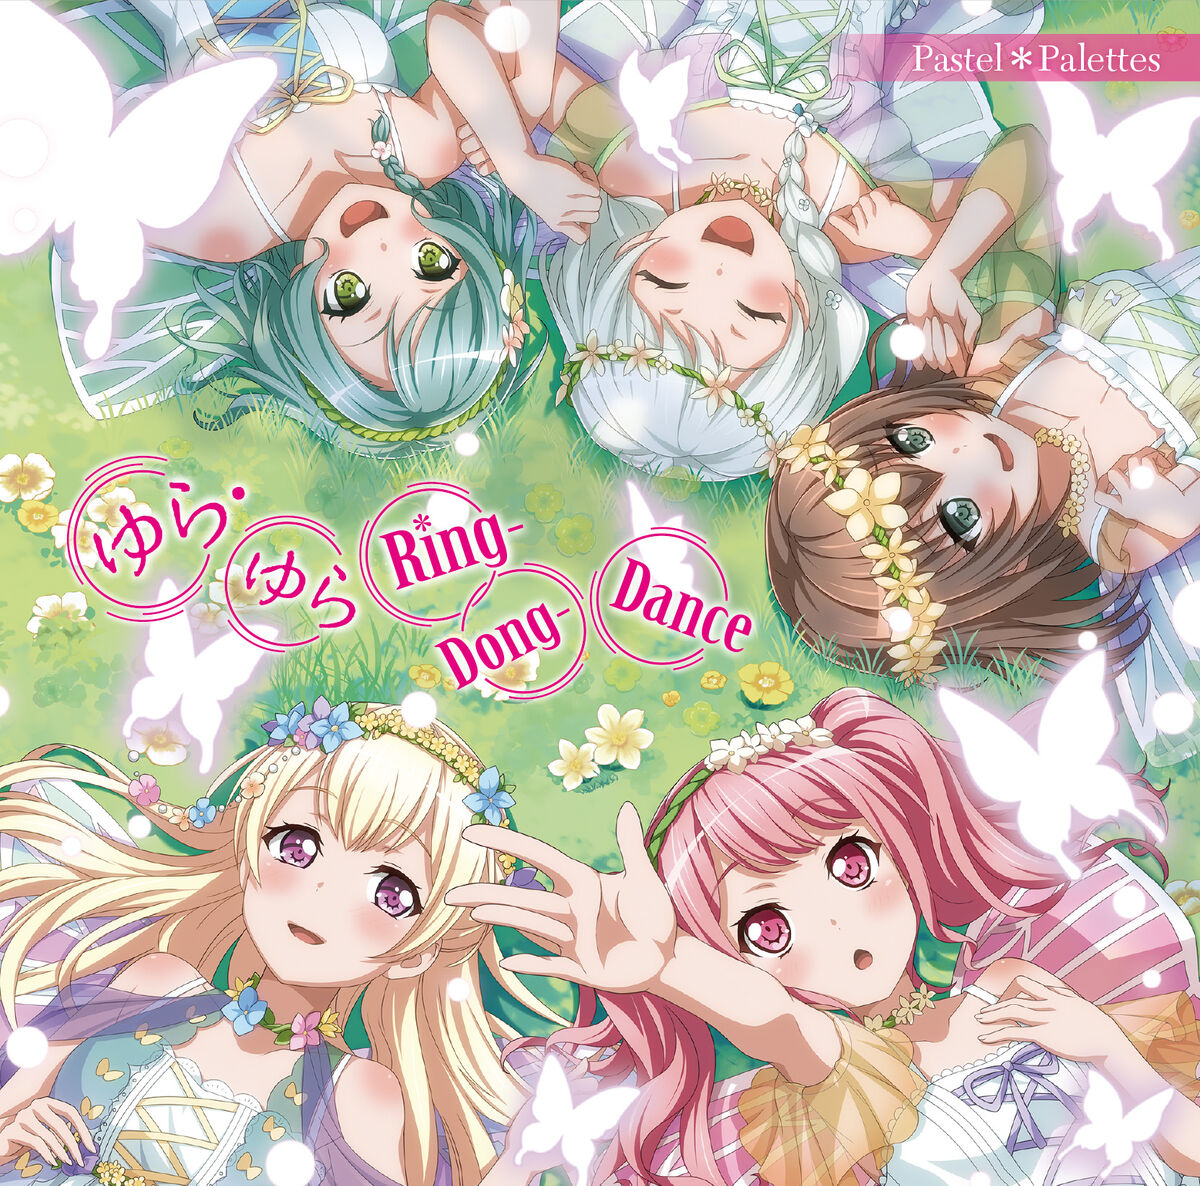 ☆ Bandori Party 🎸 on X: 🌎 During this event, you can play Pastel *  Palette's new song, Yura Yura Ring-Dong Dance! This is our first  Challenge Live event. Check our wiki